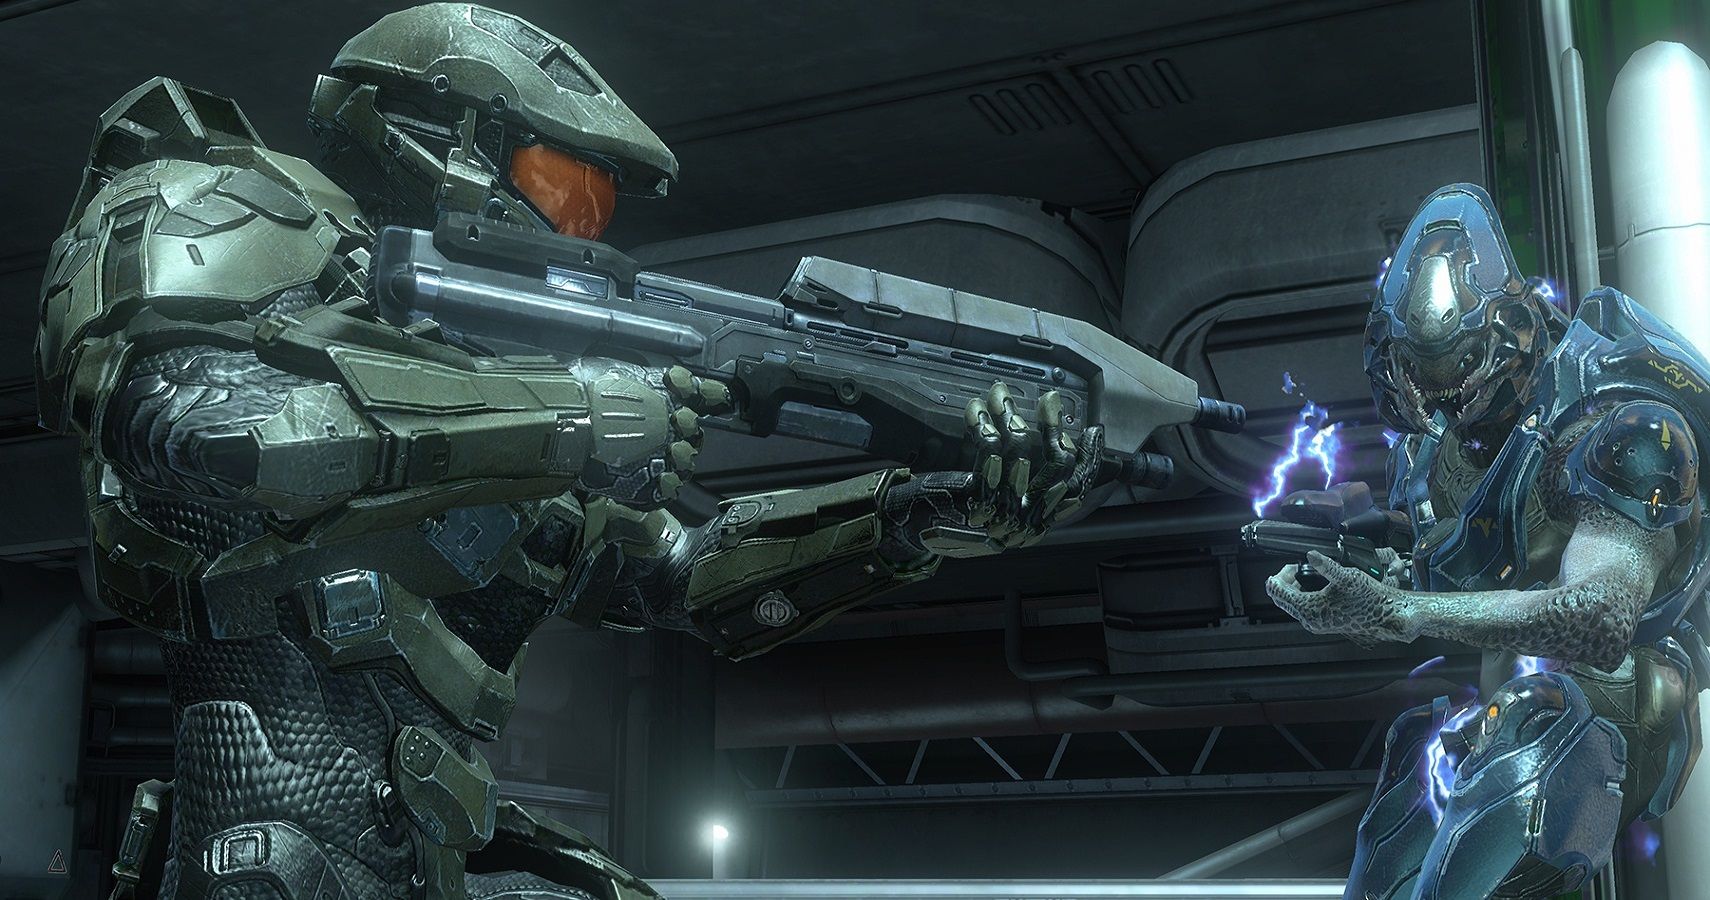 halo video games in order